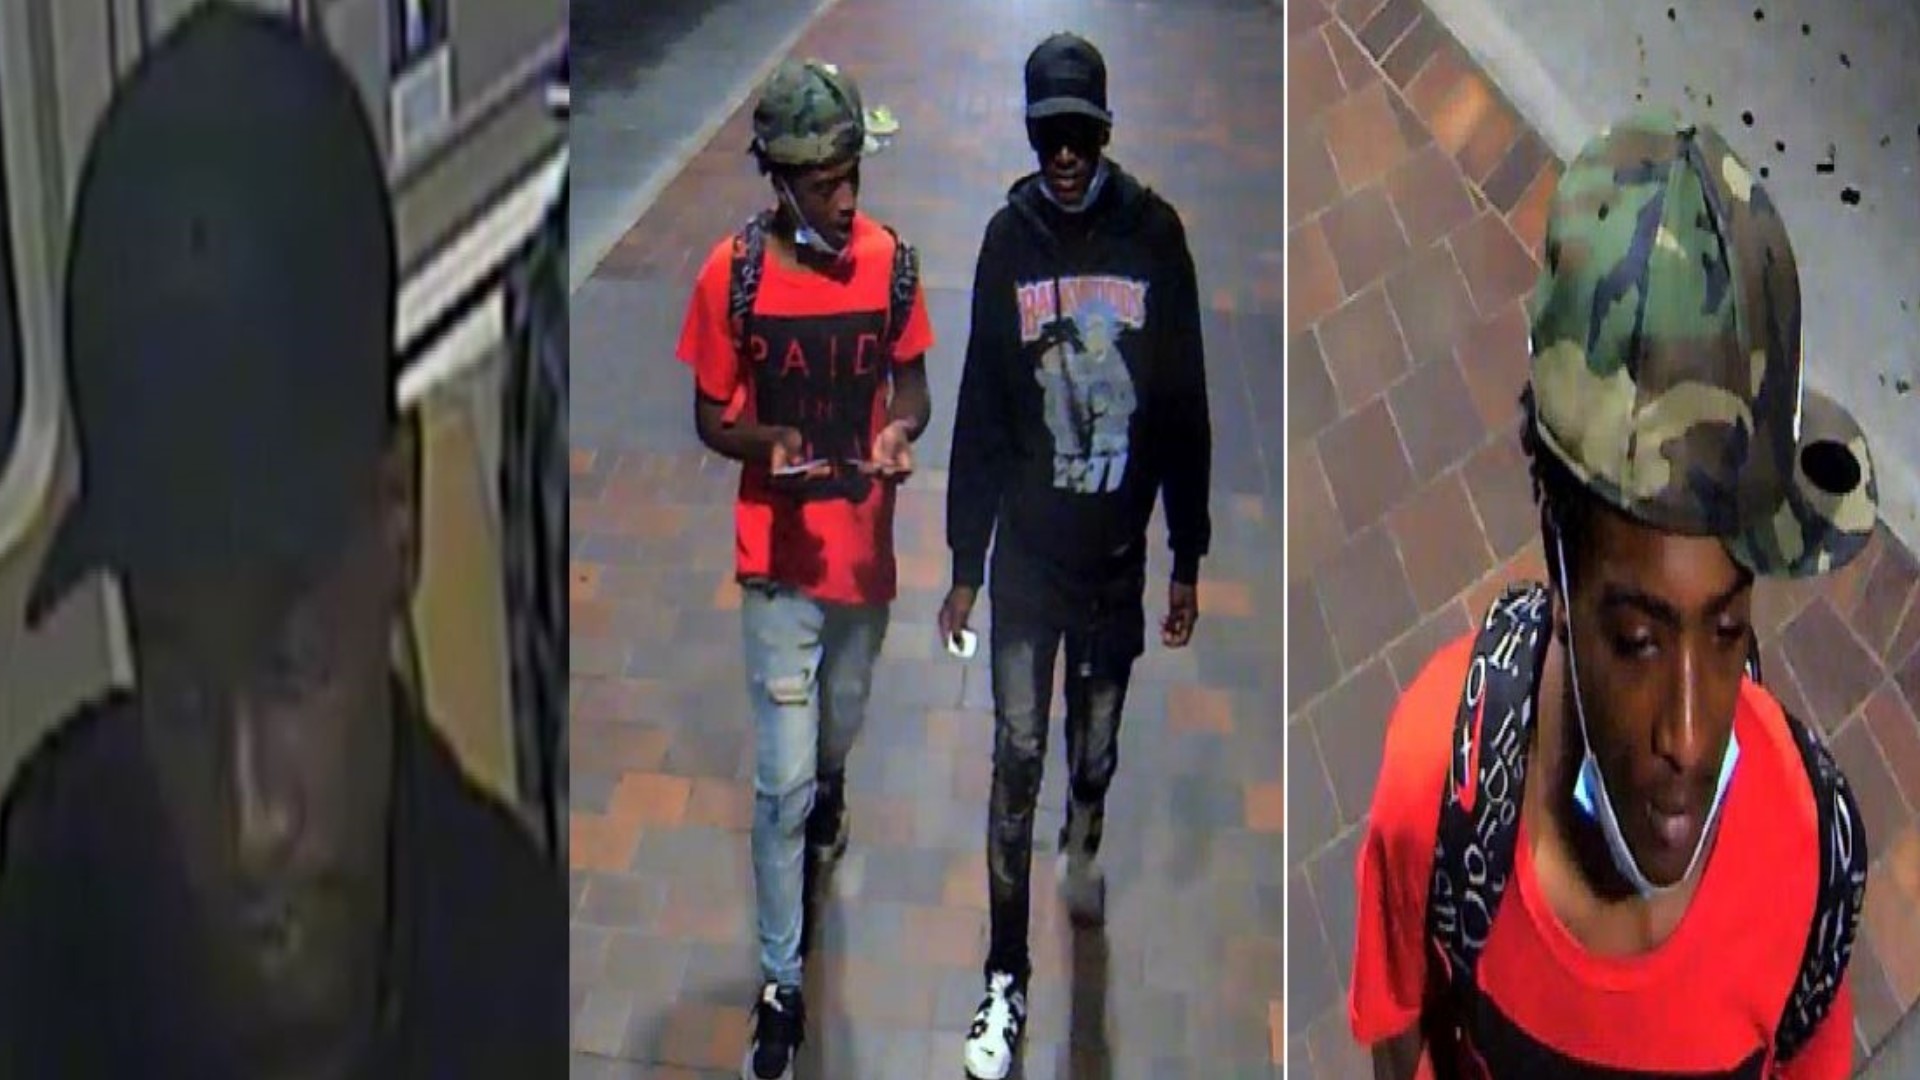 Authorities are asking for the public's help in identifying them.